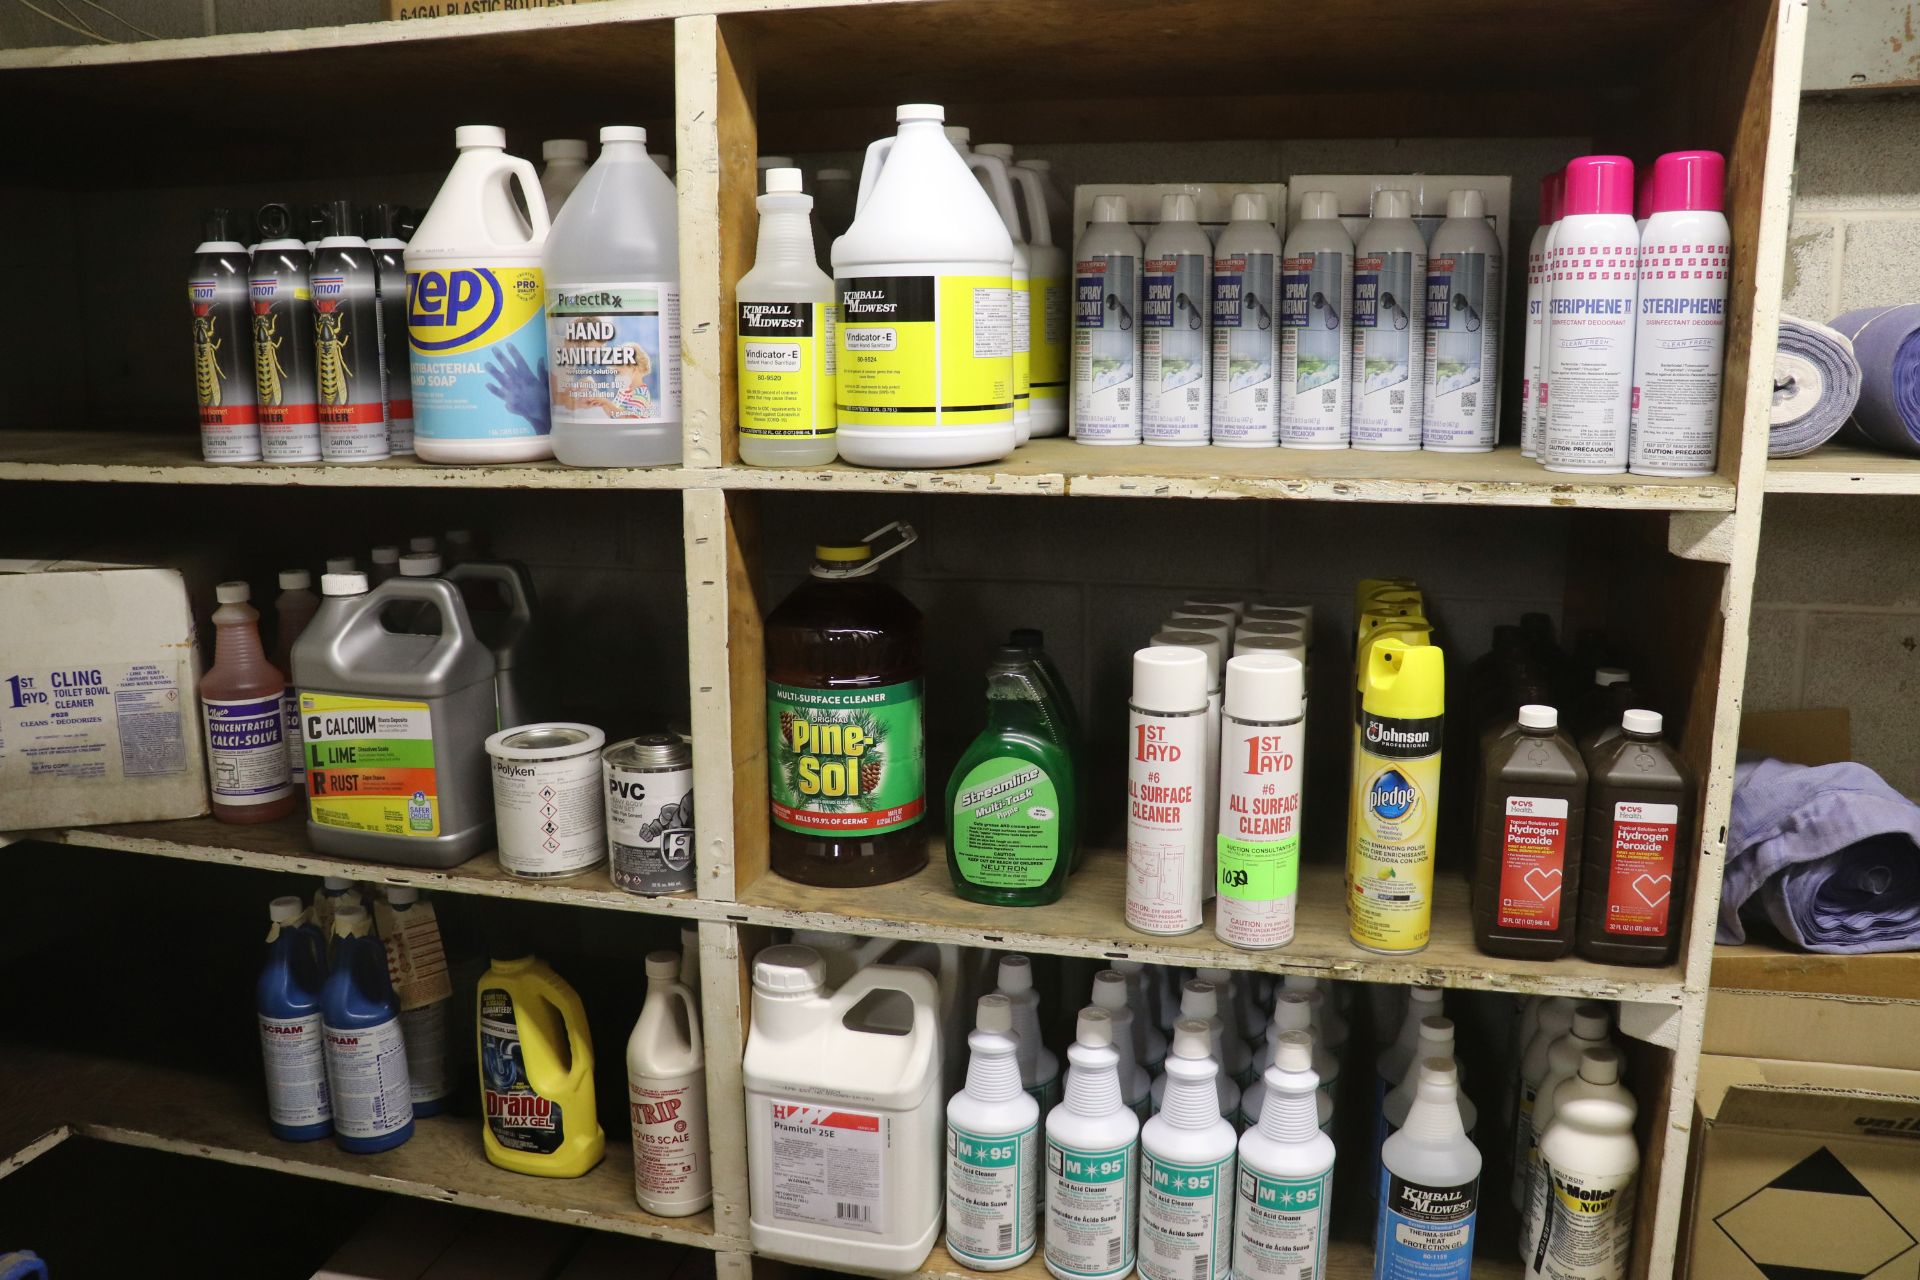 Group of cleaning supplies consisting of bleach, hydrogen peroxide, Pine-Sol, hand sanitizer and CLR